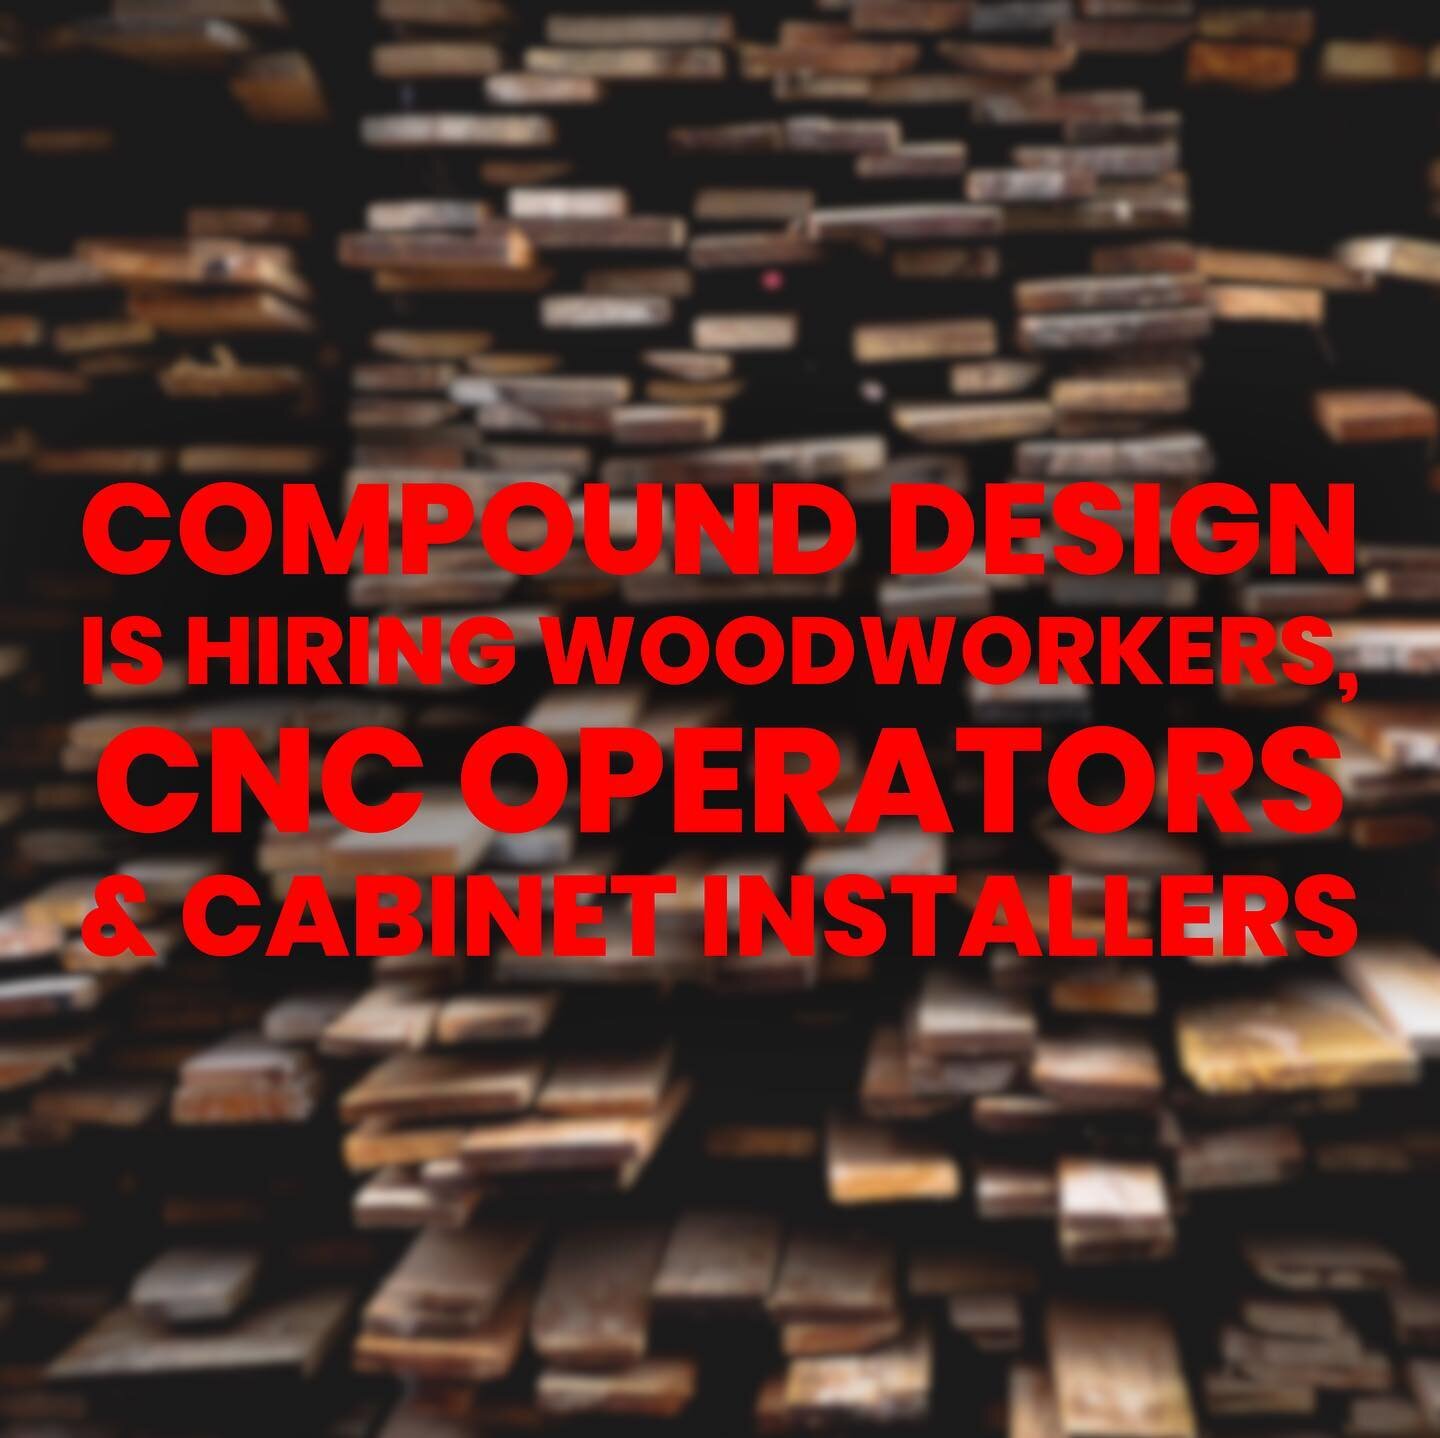 Compound Design is a residential and commercial millwork, furniture and part manufacturing company in El Paso, Texas. We are ready to grow our roster while maintaining the highest standards in quality and client satisfaction. We are actively searchin